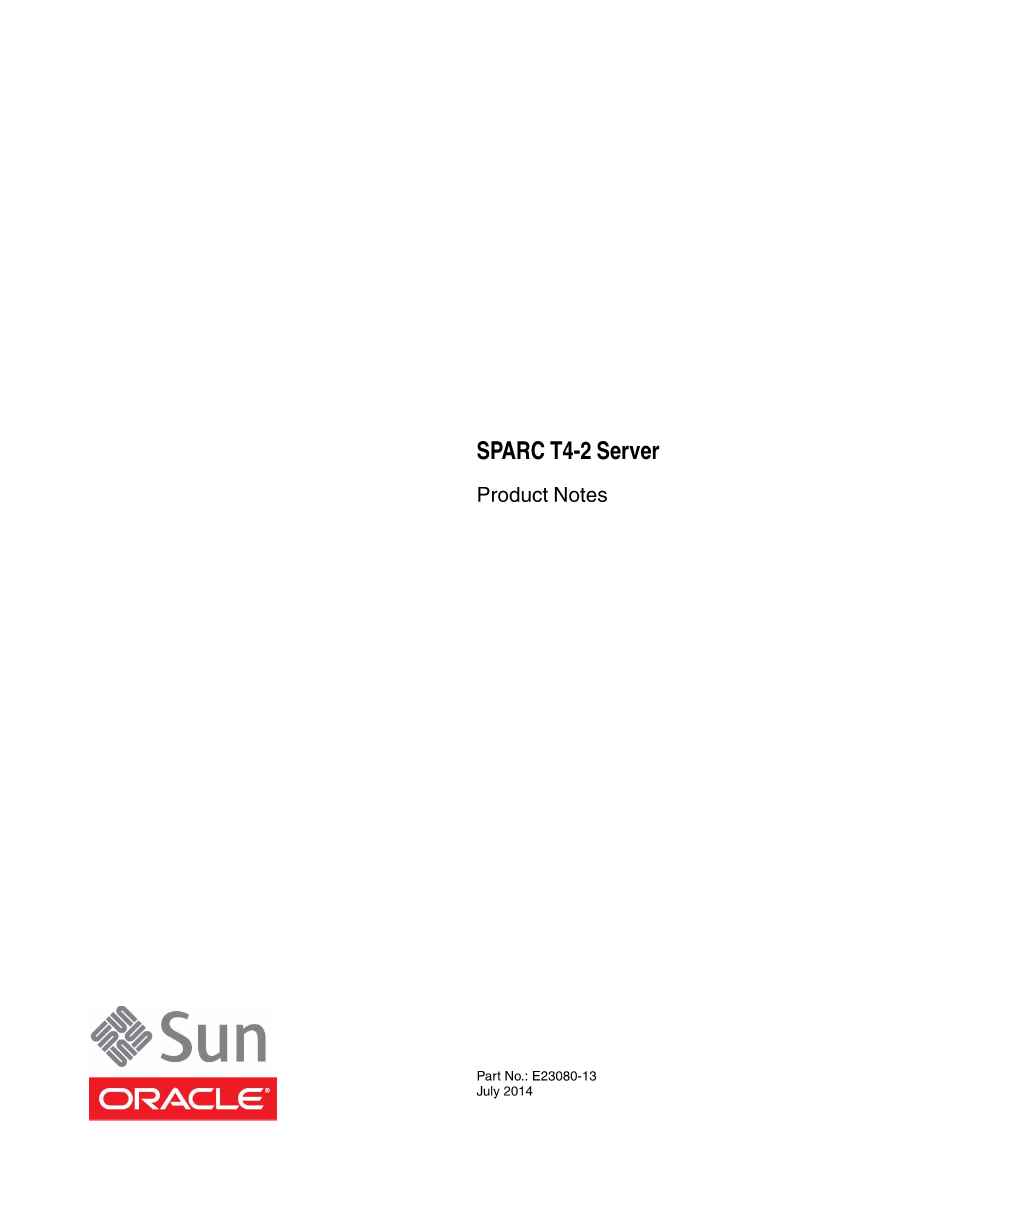 SPARC T4-2 Server Product Notes